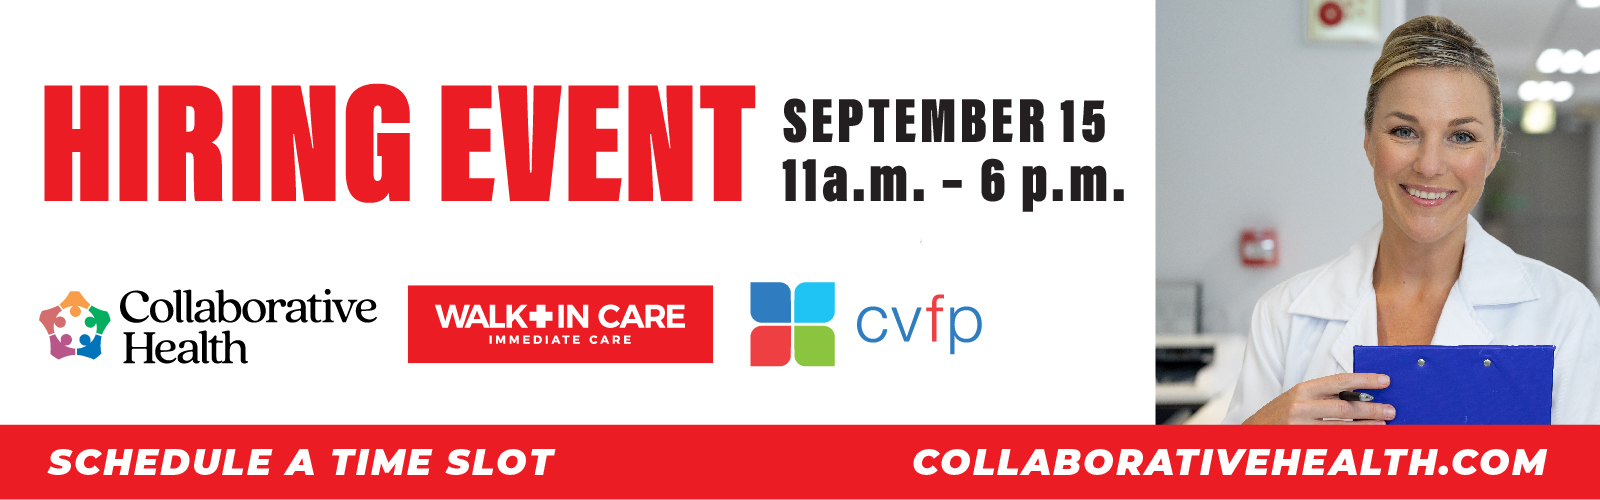 Join Us For Our Hiring Event on 9/15!